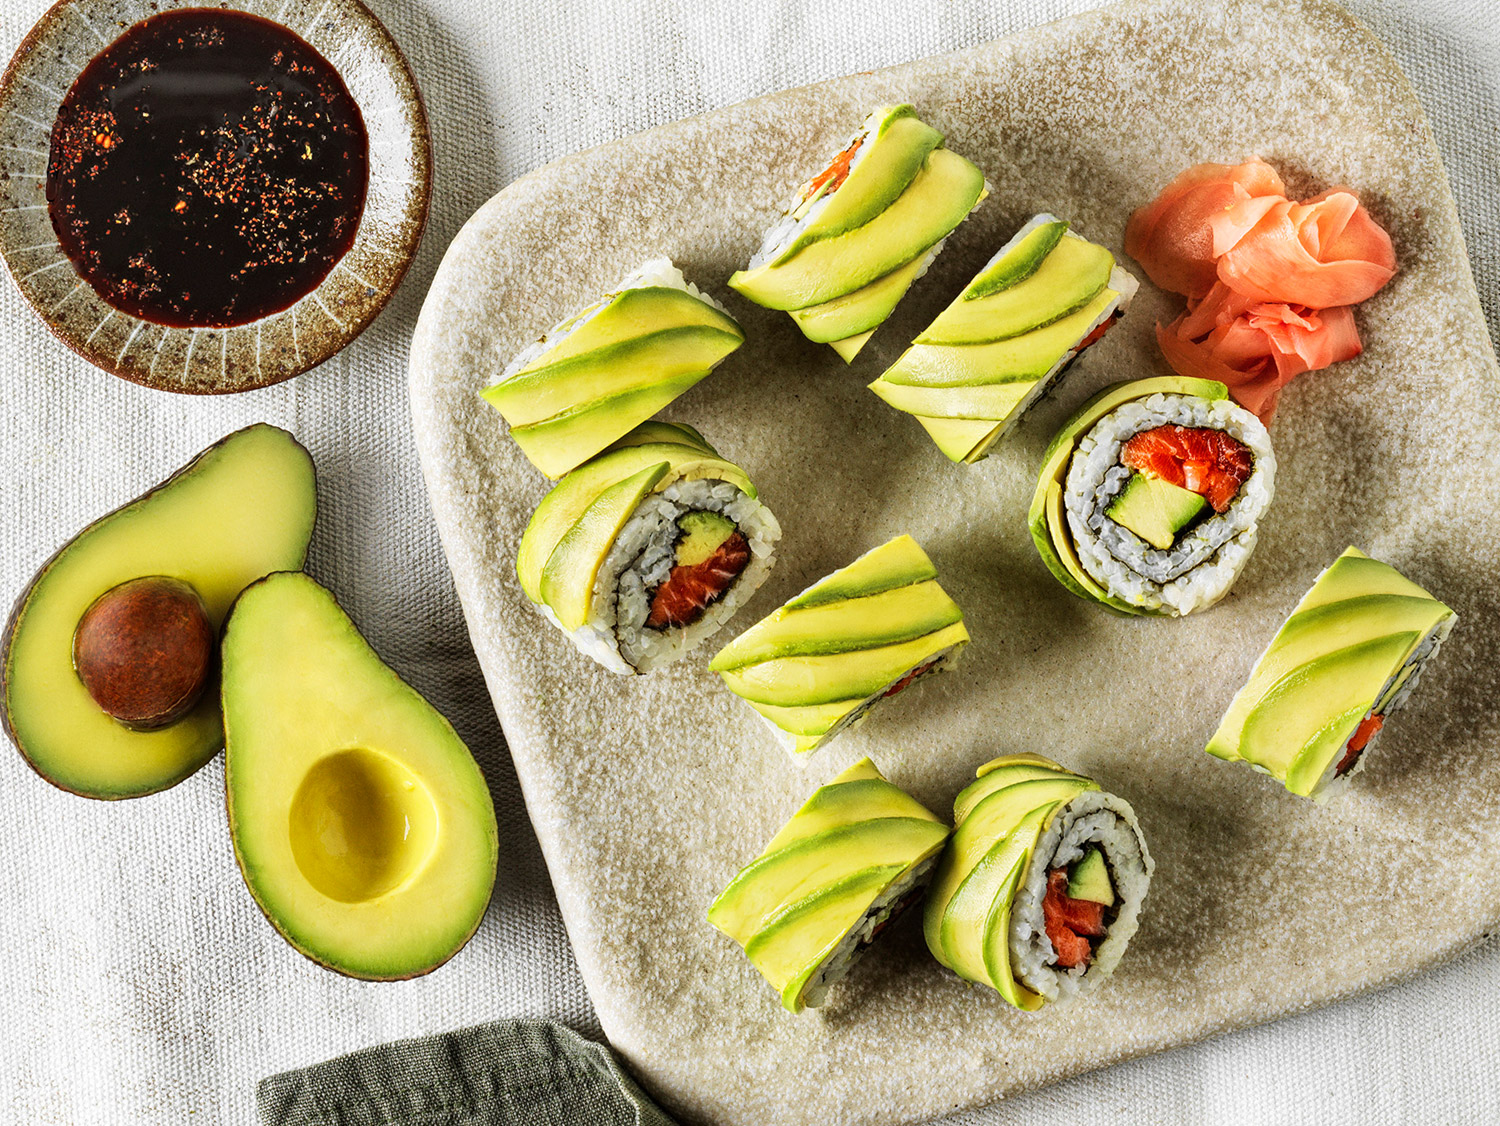 salmon avocado eel sushi roll recipe – use real butter